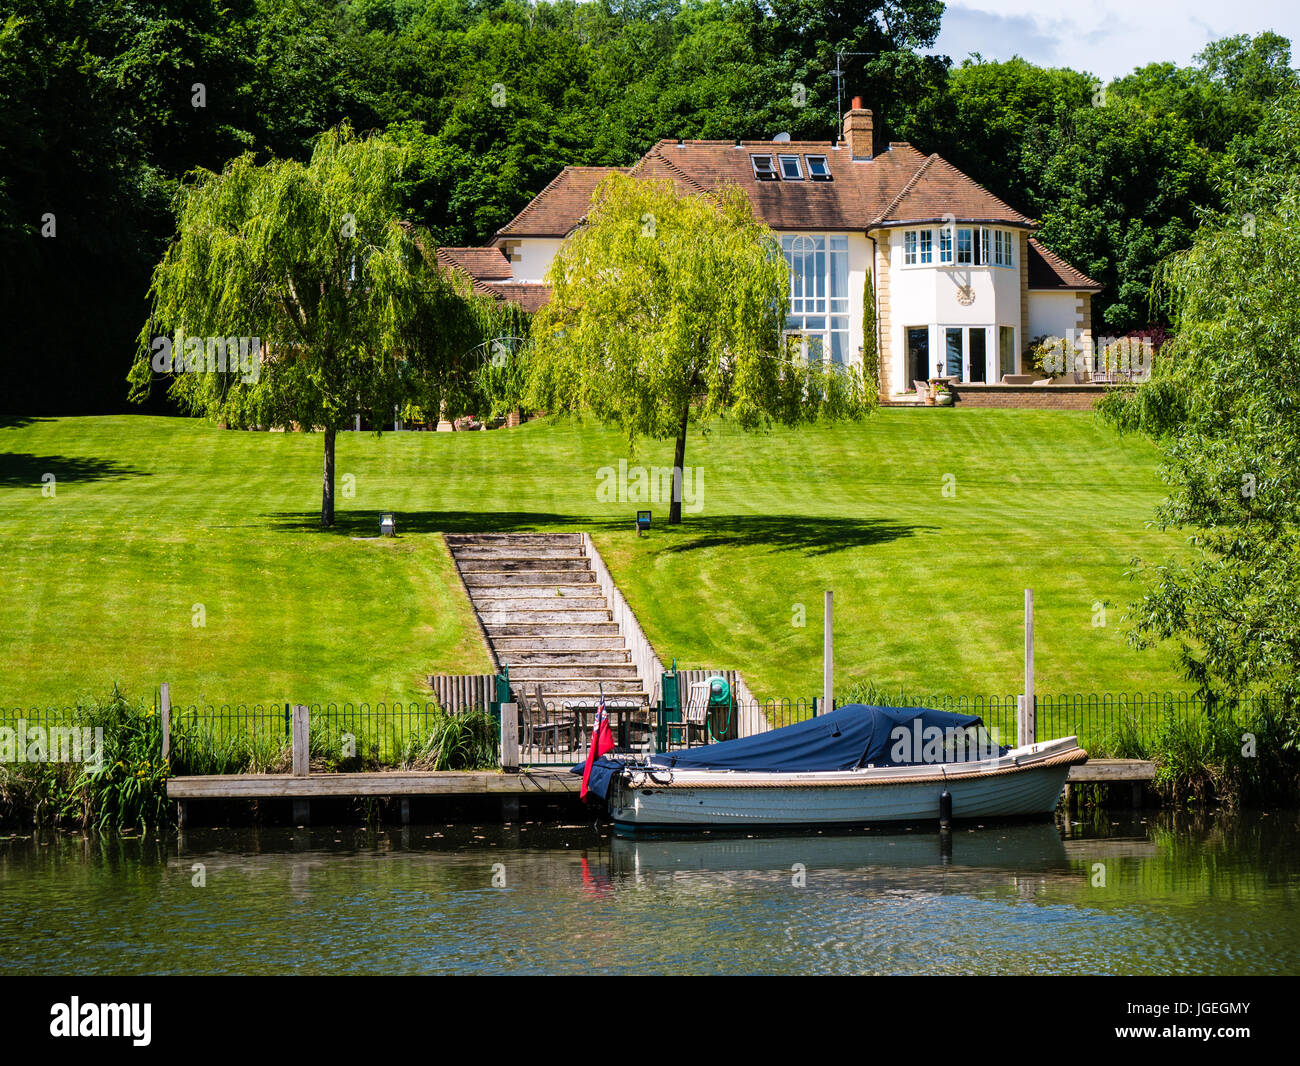 Luxury House with Lawn and Boat moored, Streatley-on-Thames, Berkshire, England Stock Photo